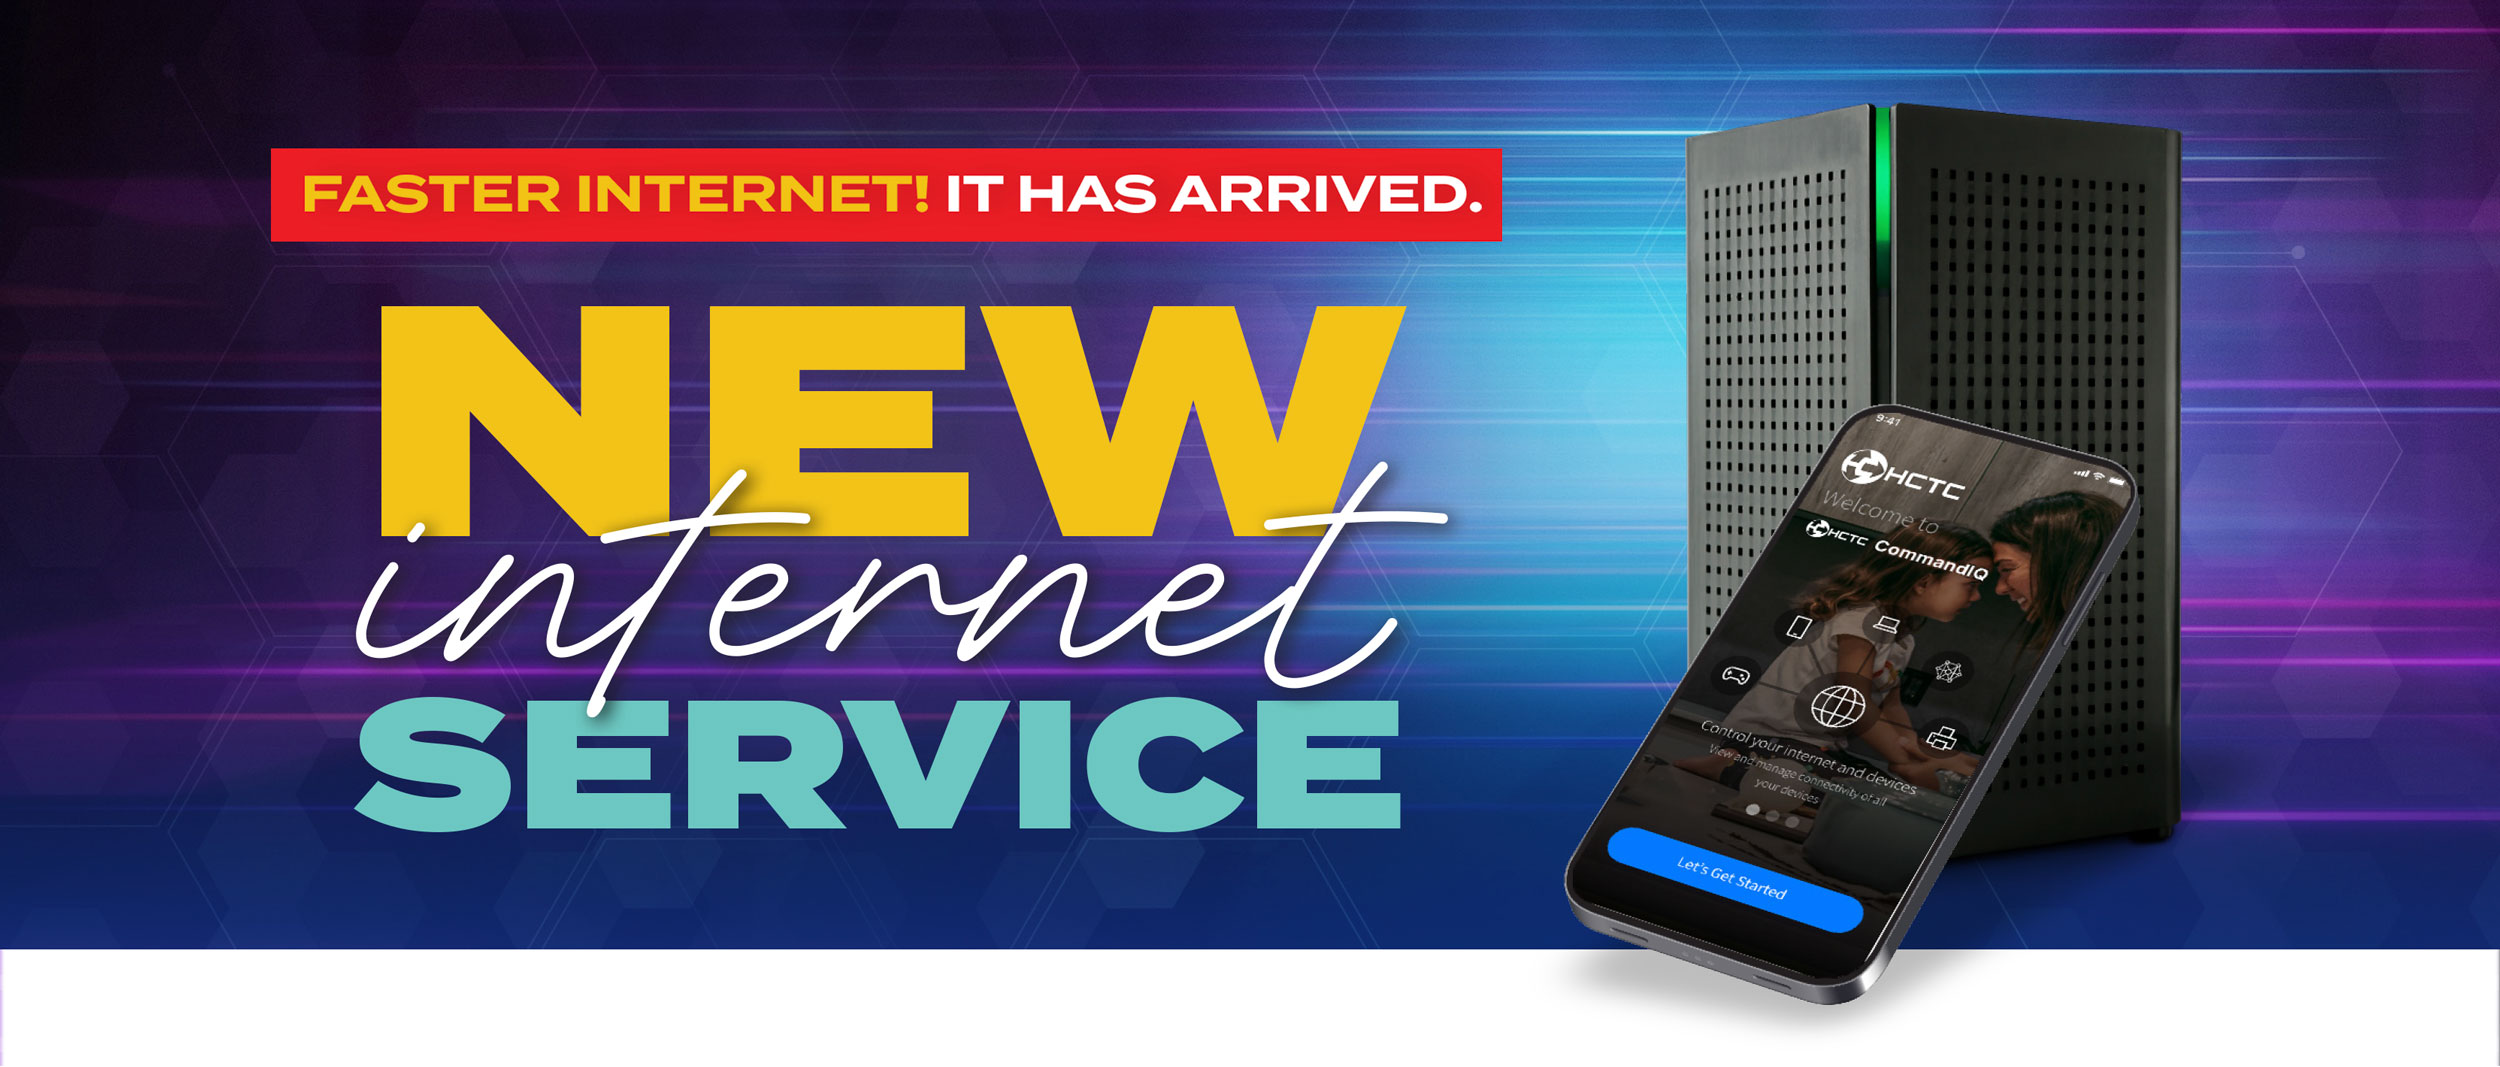 New Internet Service. Faster Internet. It Has arrived.